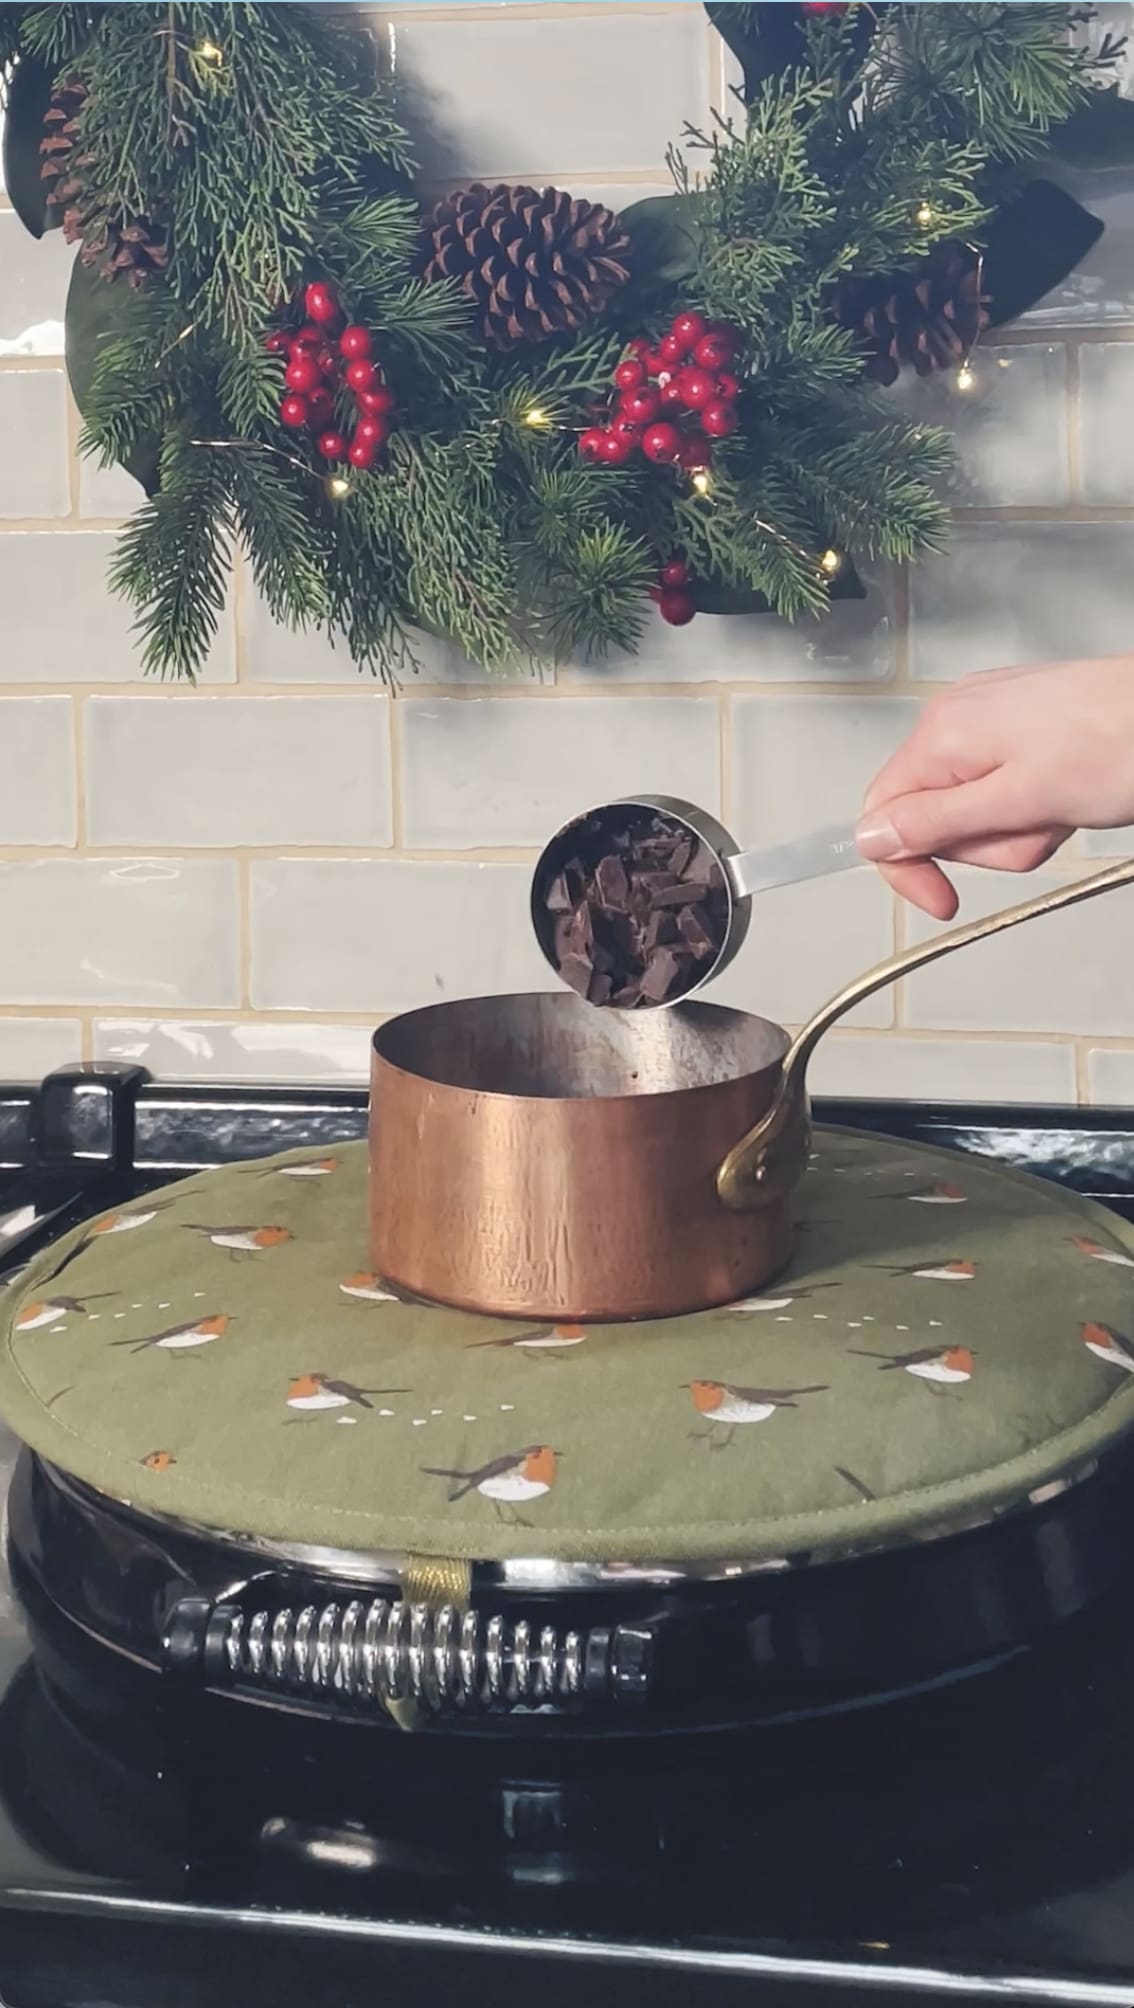 Pour in the chocolate pieces - Choc-Orange hot chocolate recipe from Sophie Allport 